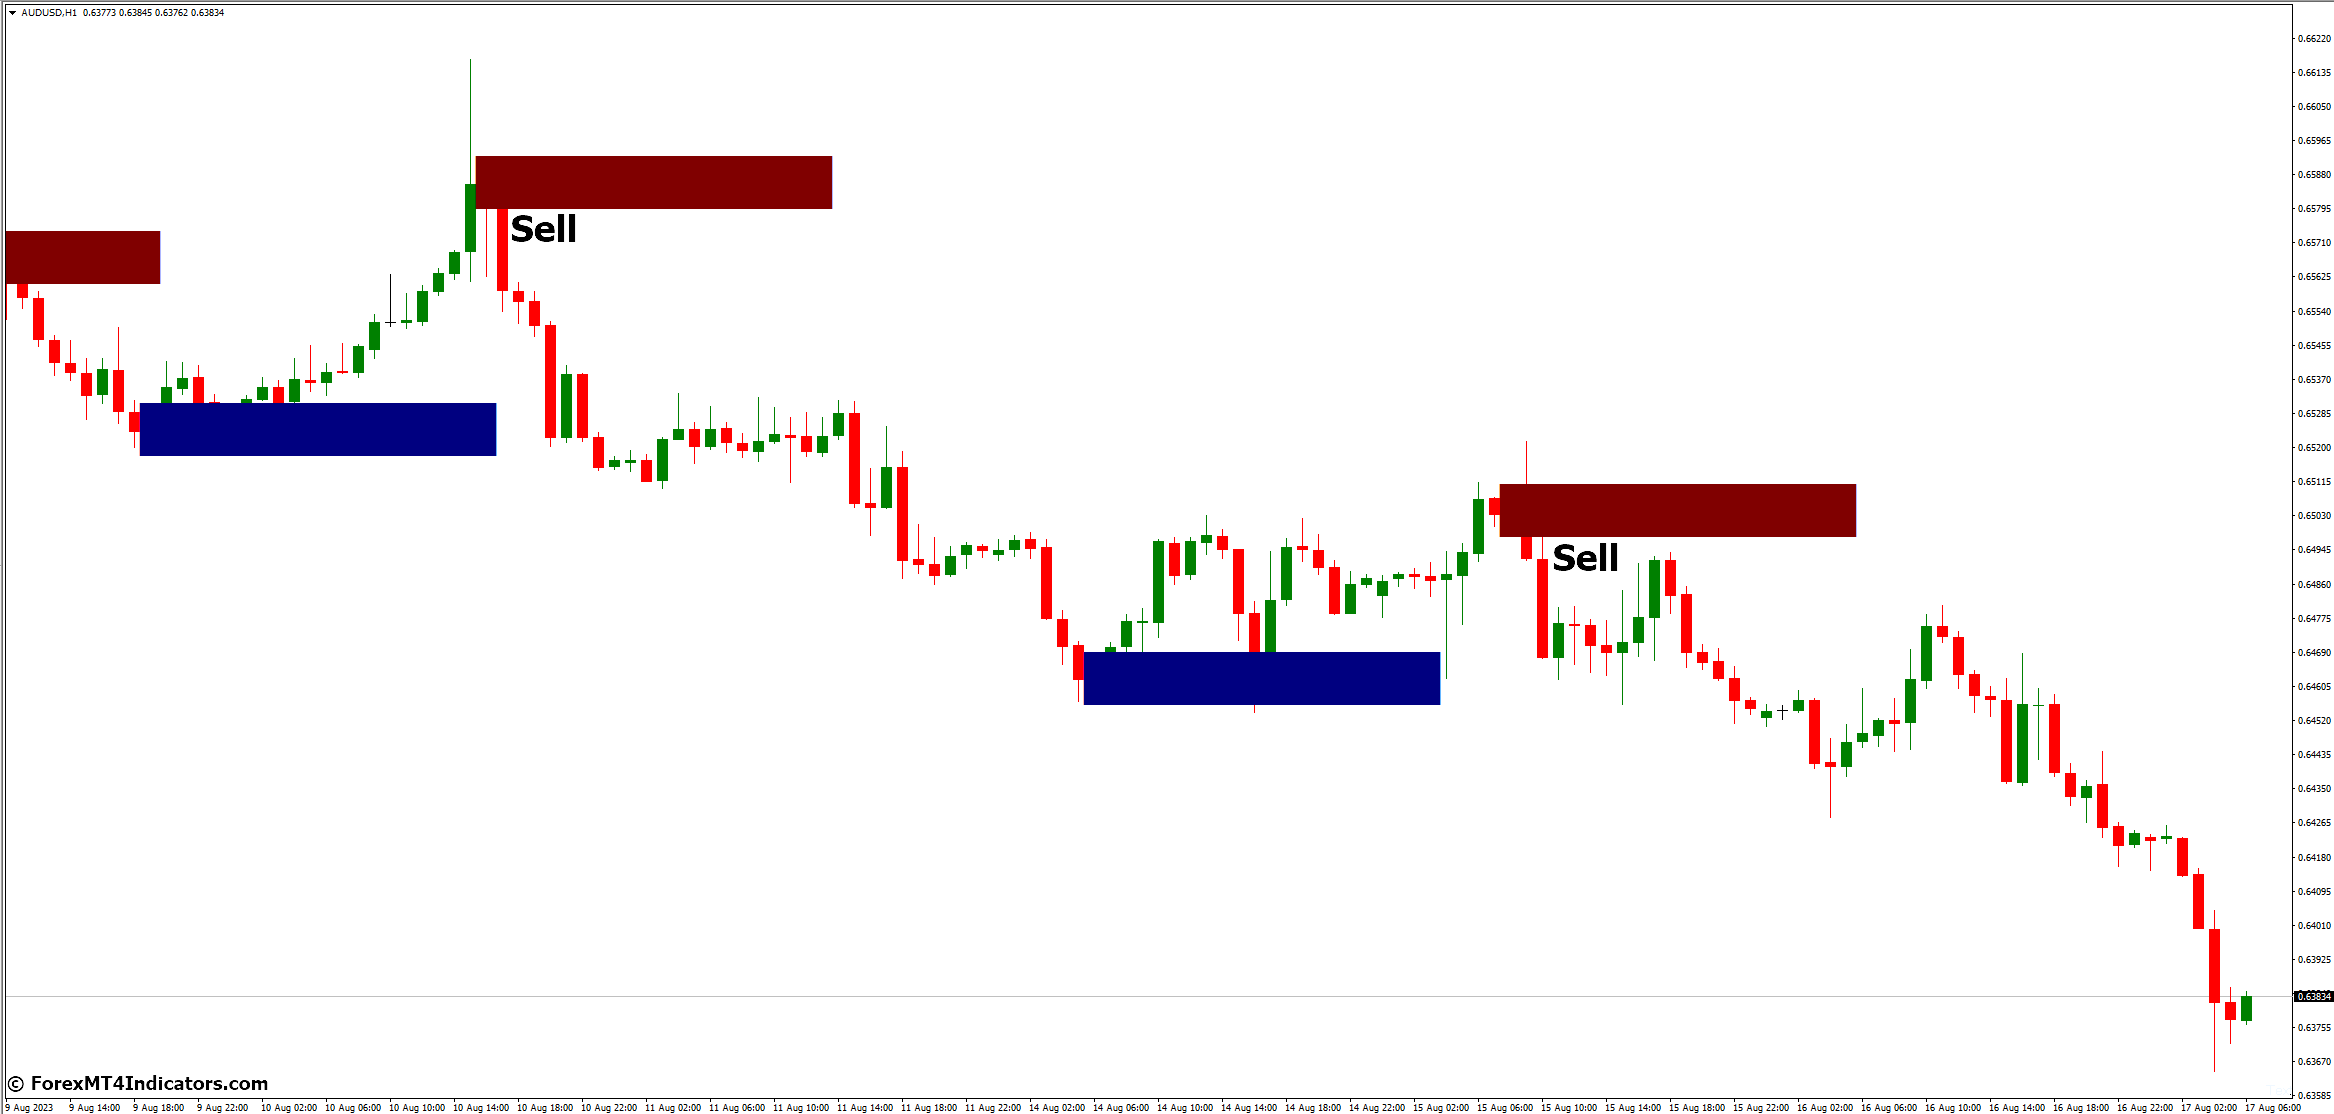 How to Trade with Order Block Breaker MT4 Indicator